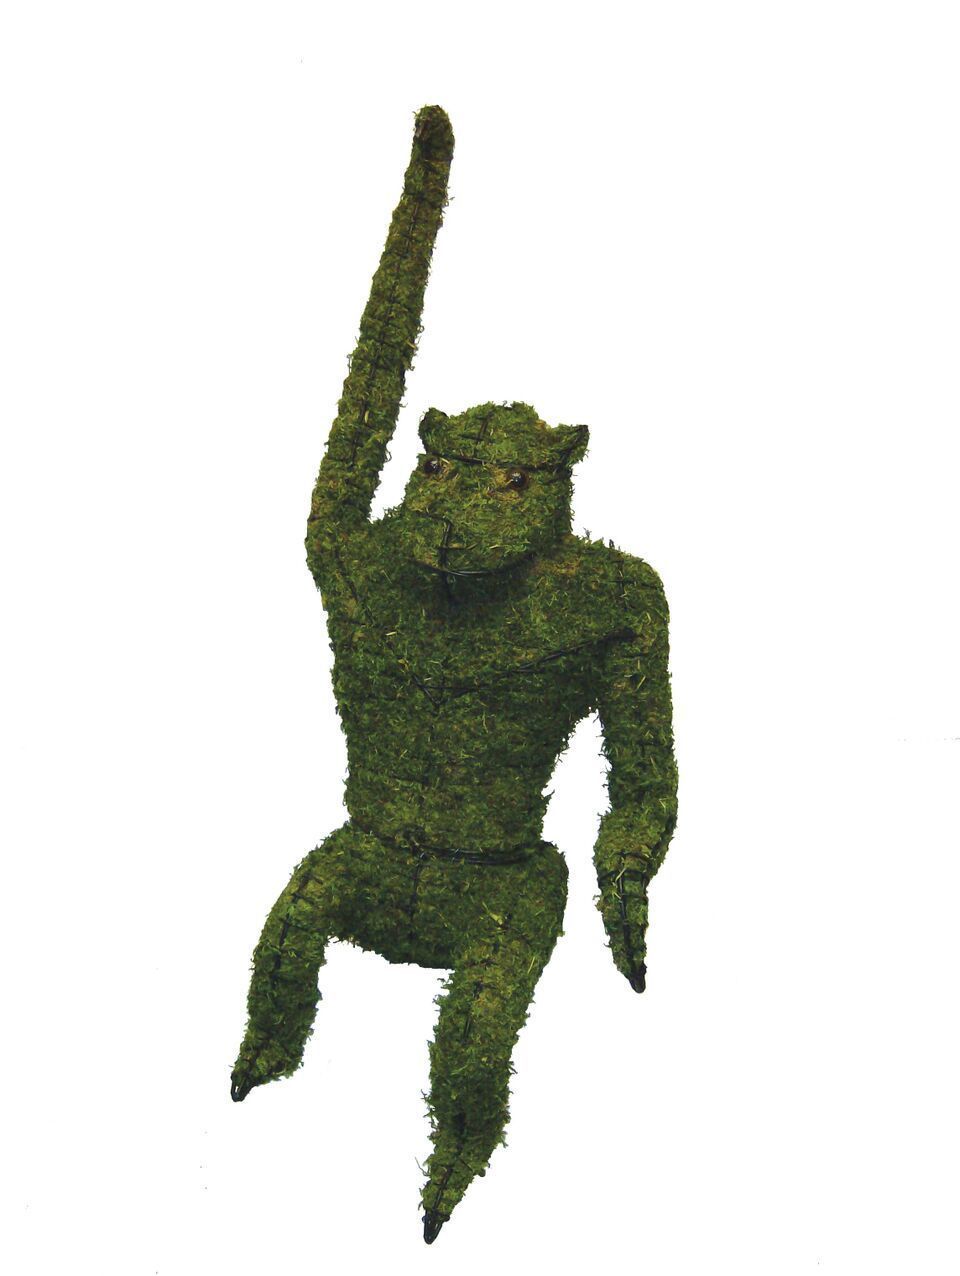 Hanging Monkey 30" Topiary Sculpture - Moss Filled - $92.99 - $179.99